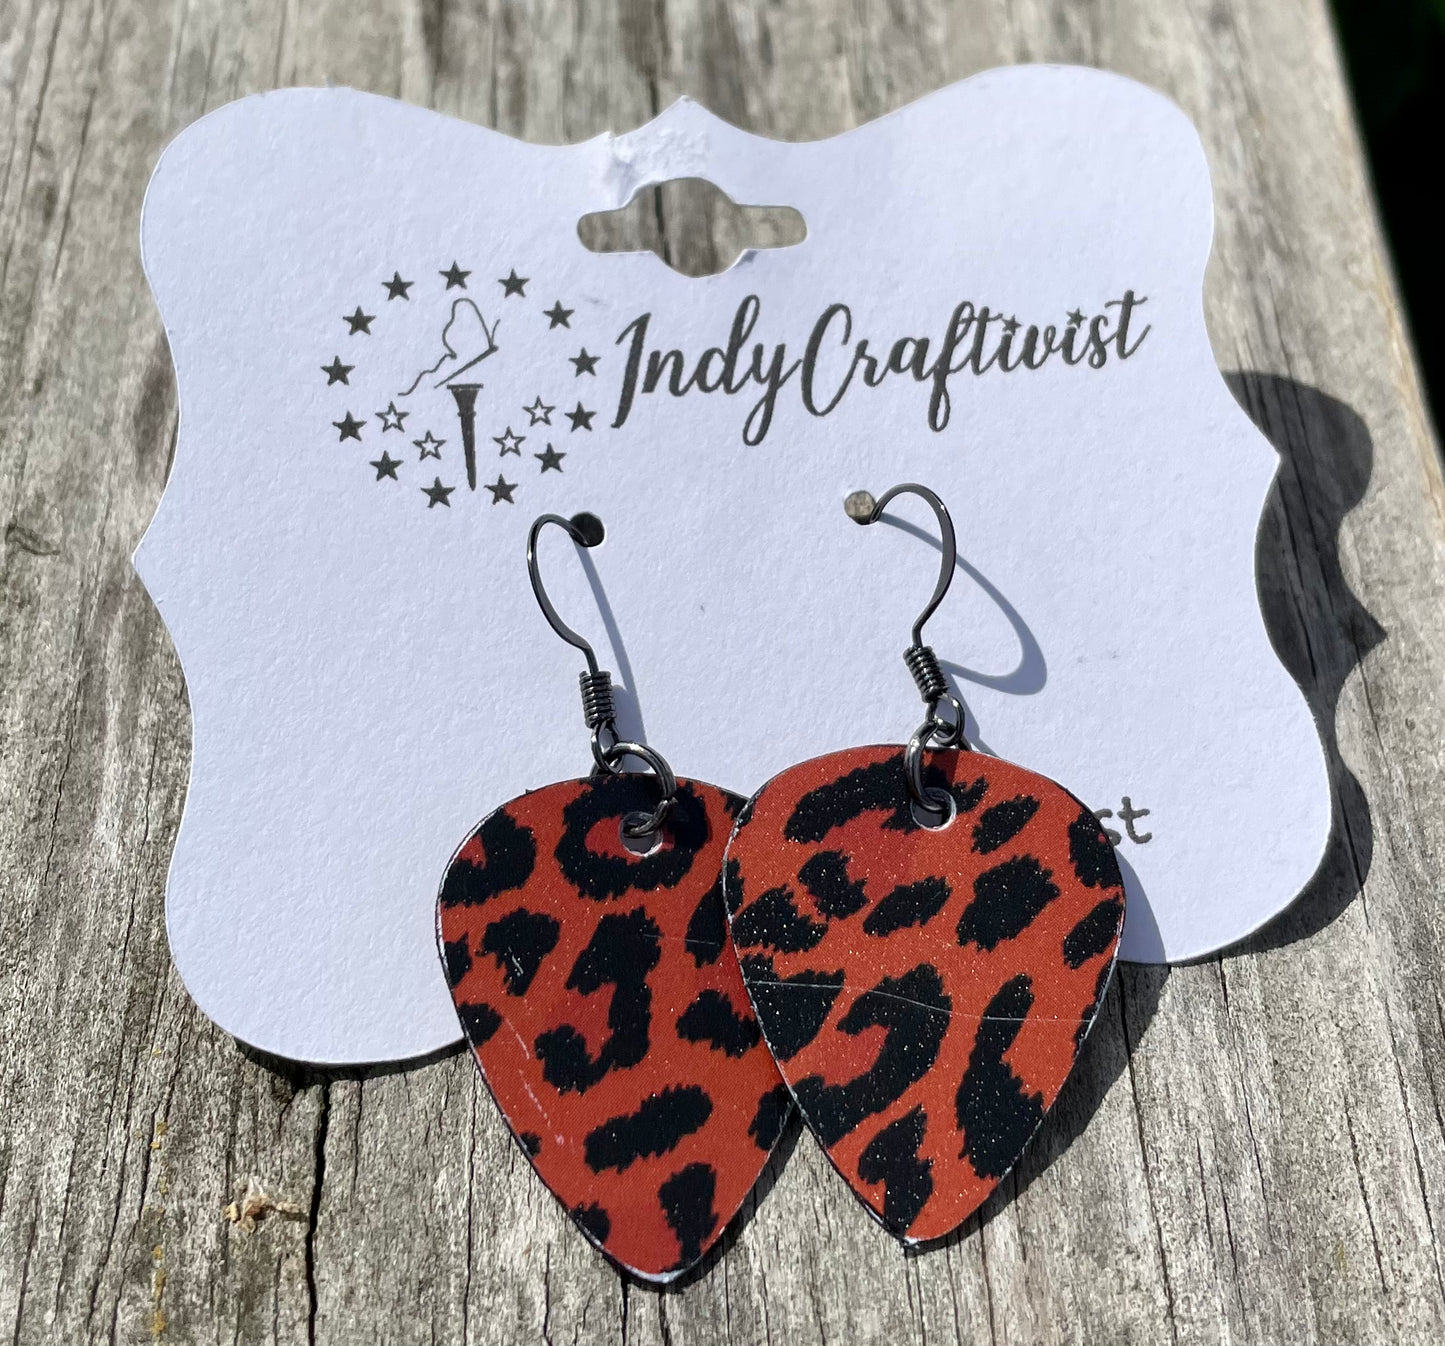 Upcycled Guitar Pick Earrings